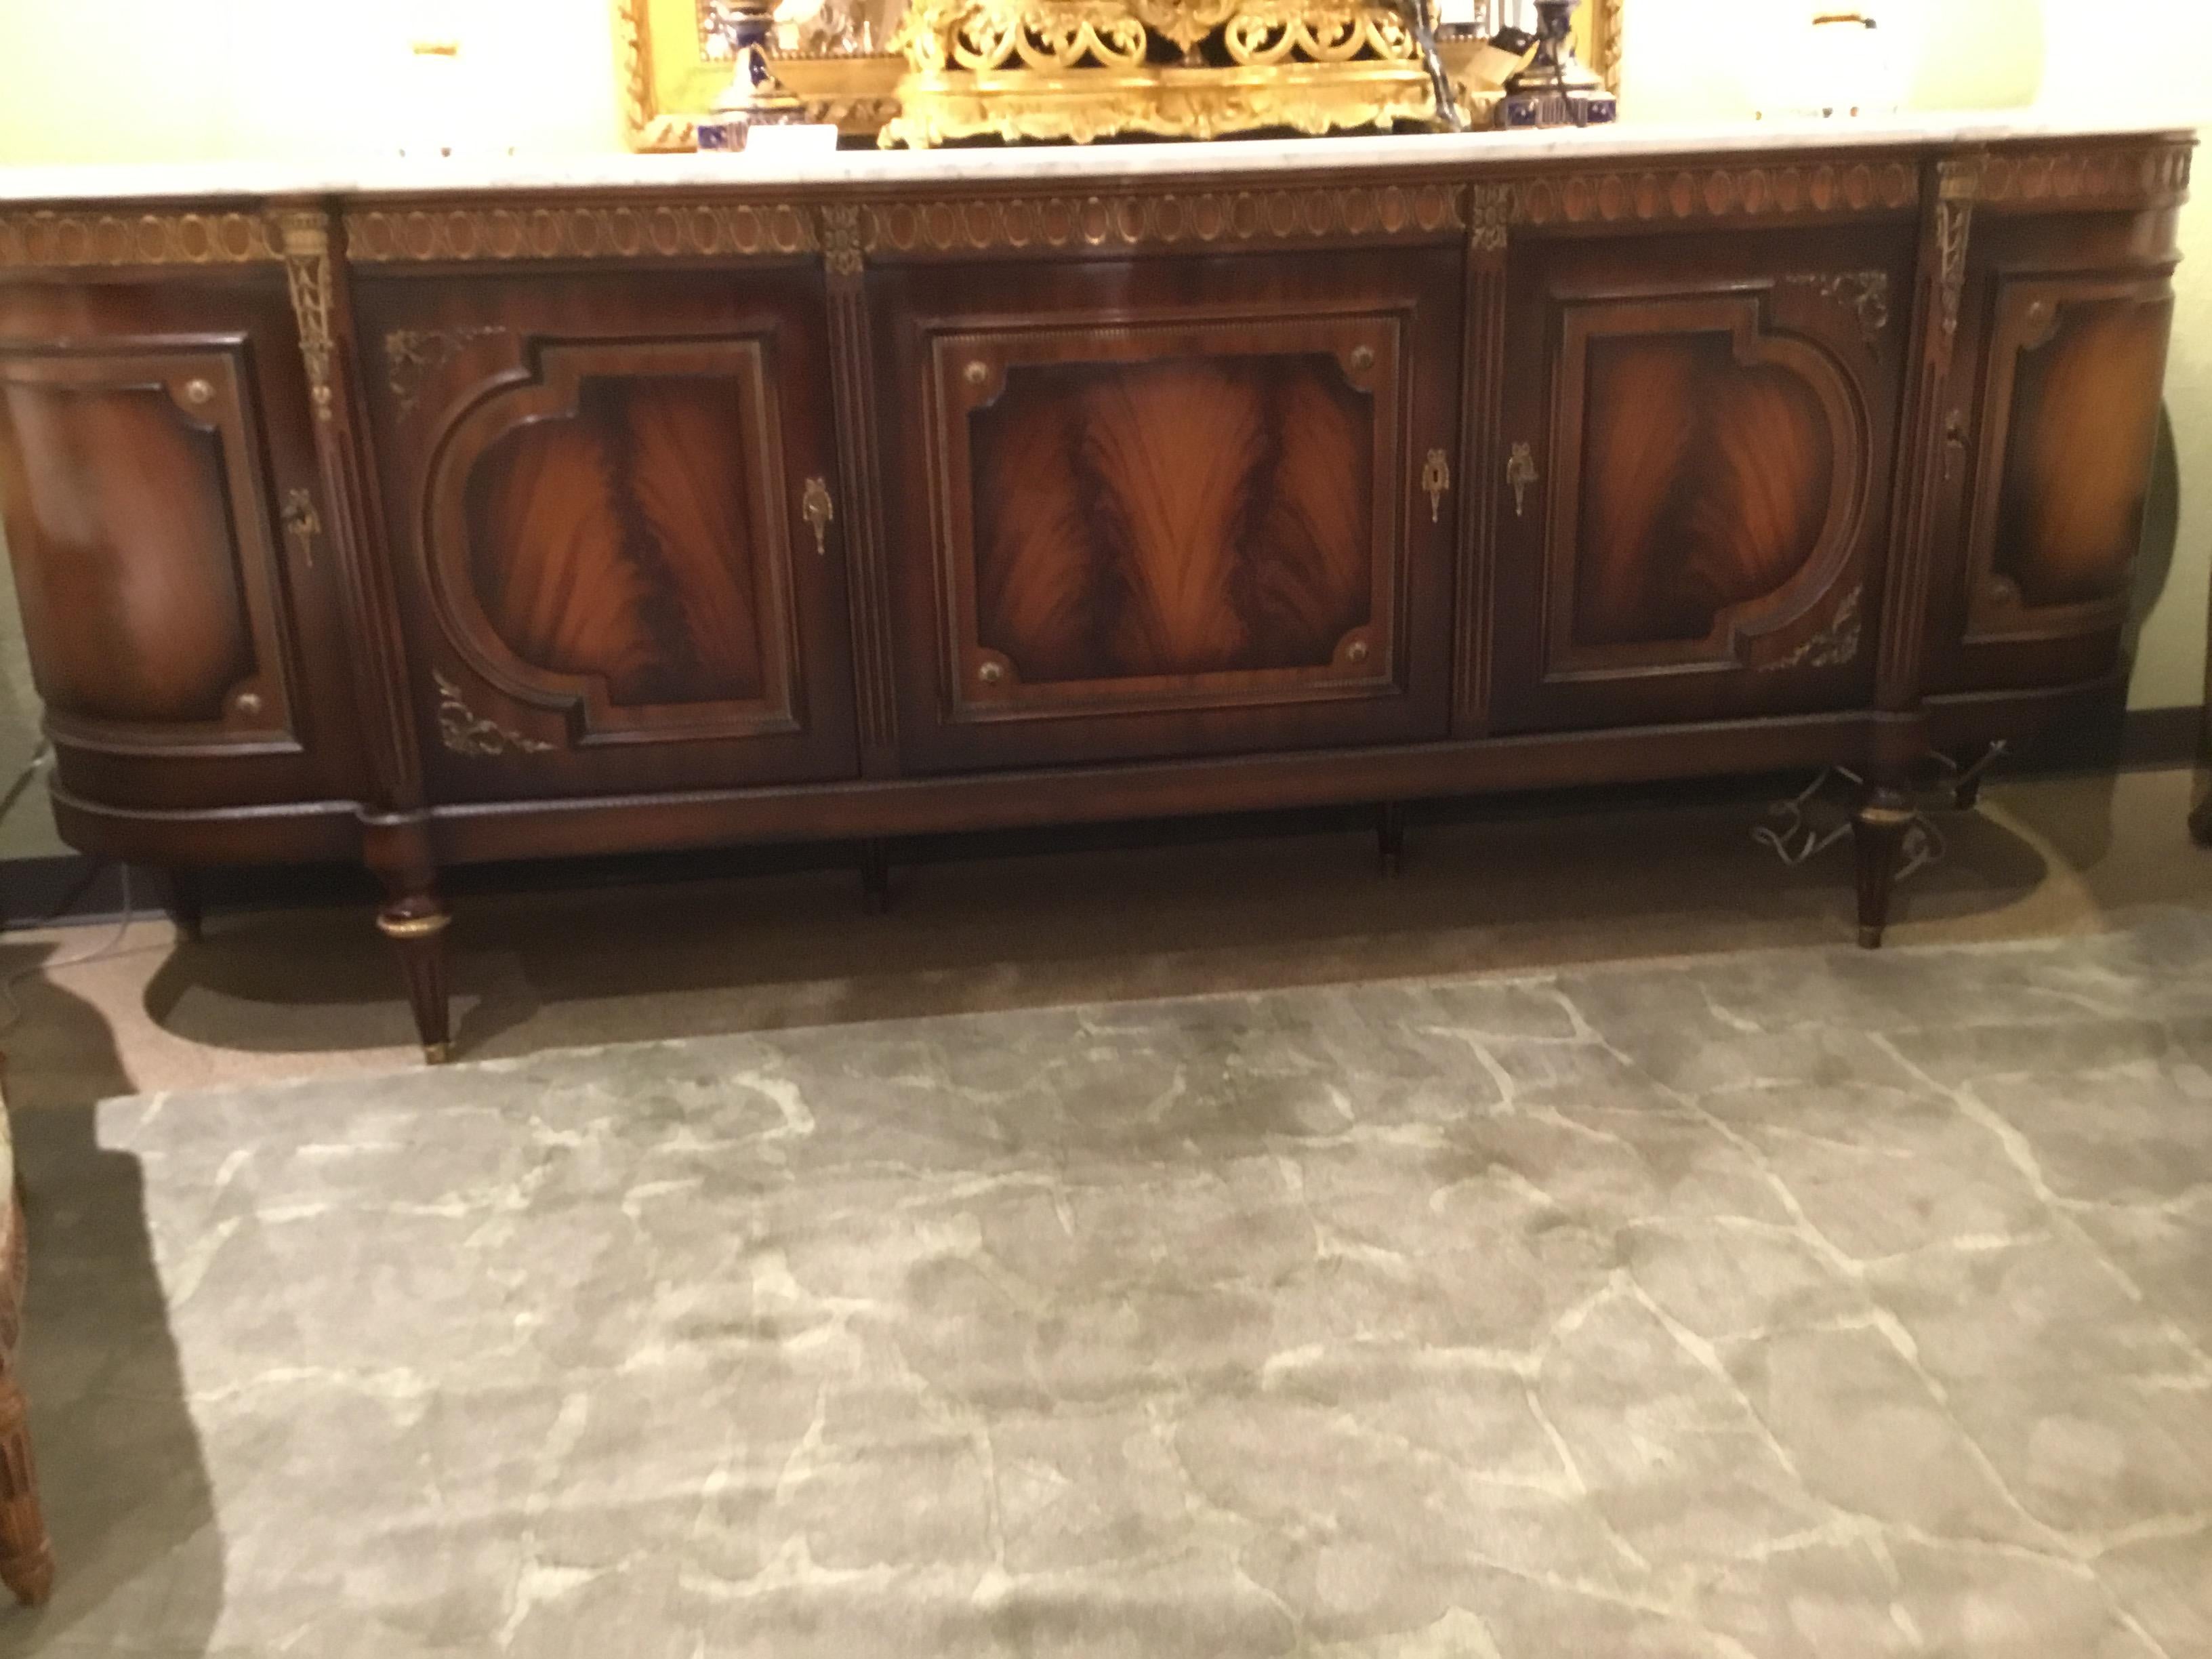 Mahogany sideboard in Louis XVI style, signed JP Ehalt, having a white marble top above curved 
Case with gilt metal accents throughout, far left opens to a bar cabinet with mirrored back with
Two glass shelves, beside that cabinet door opens to